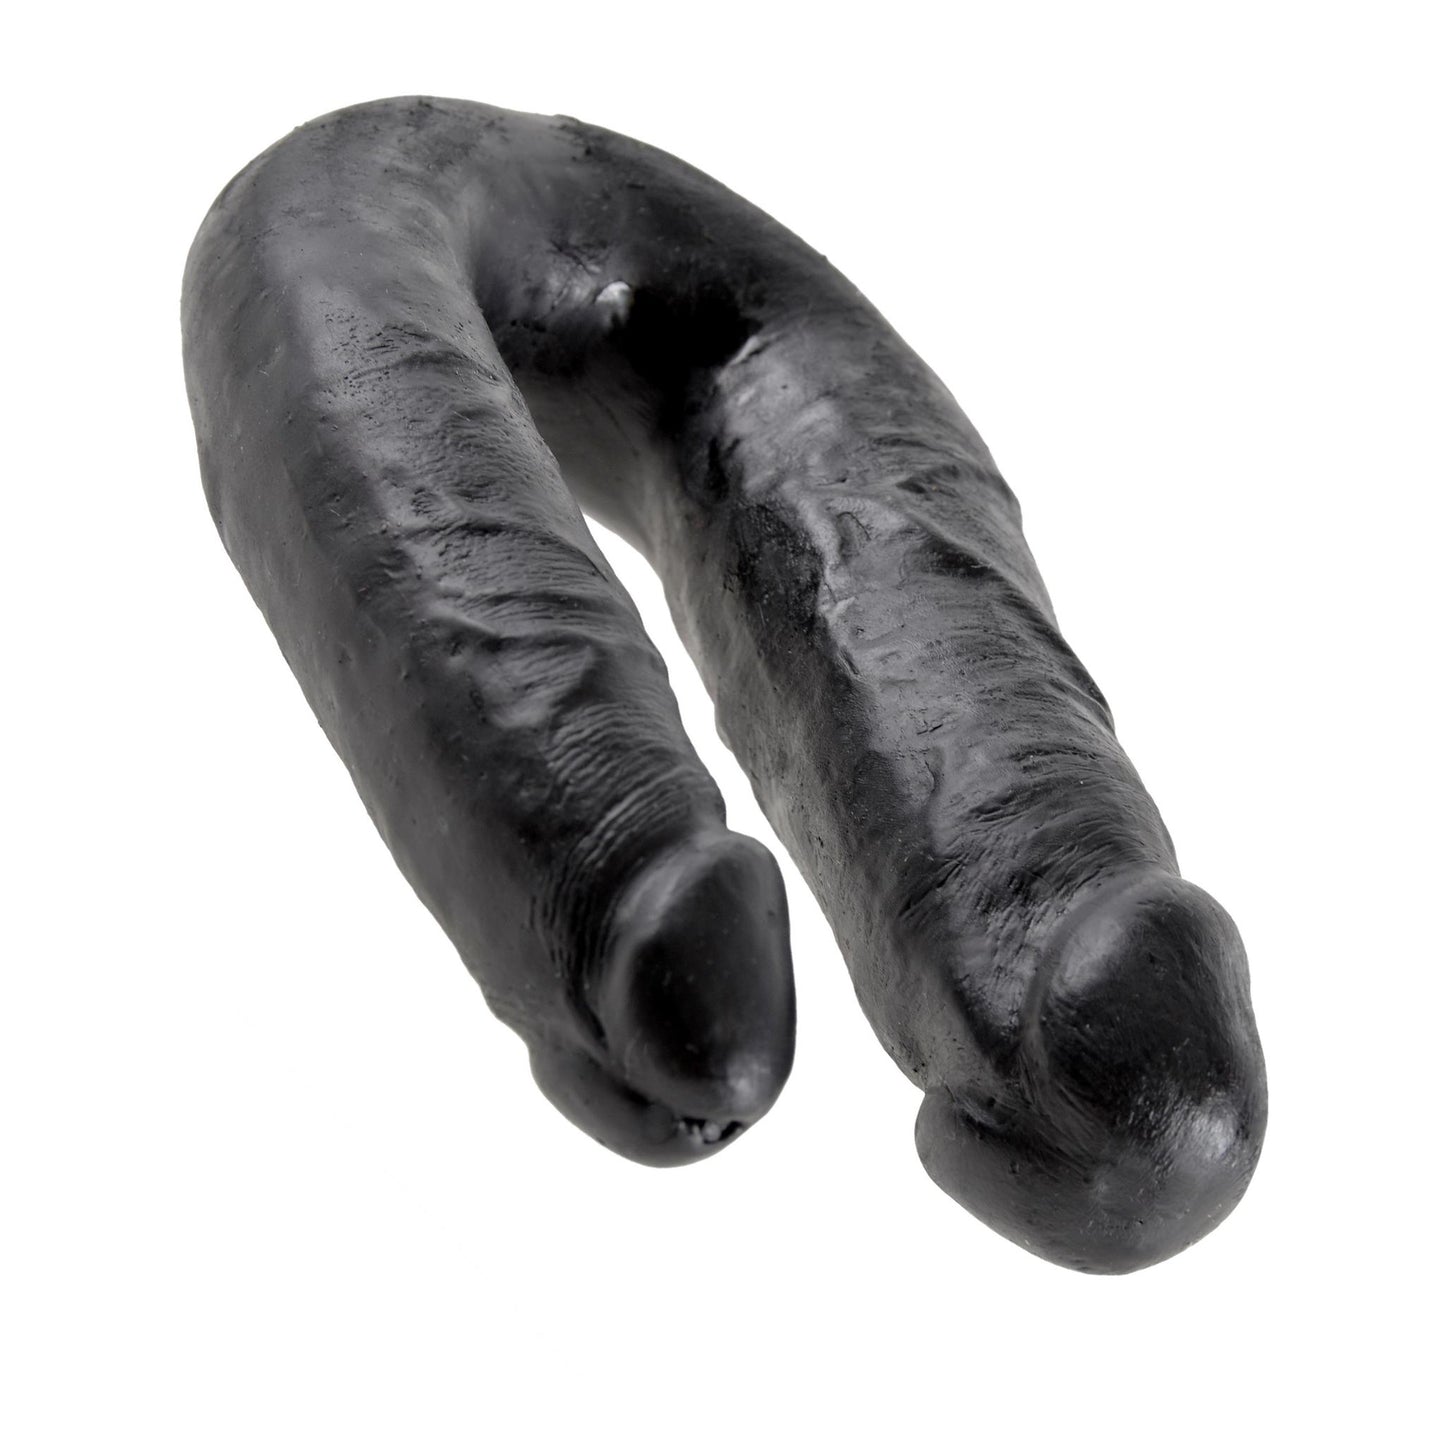 King Cock Medium Double Trouble - Double Ended Dildo